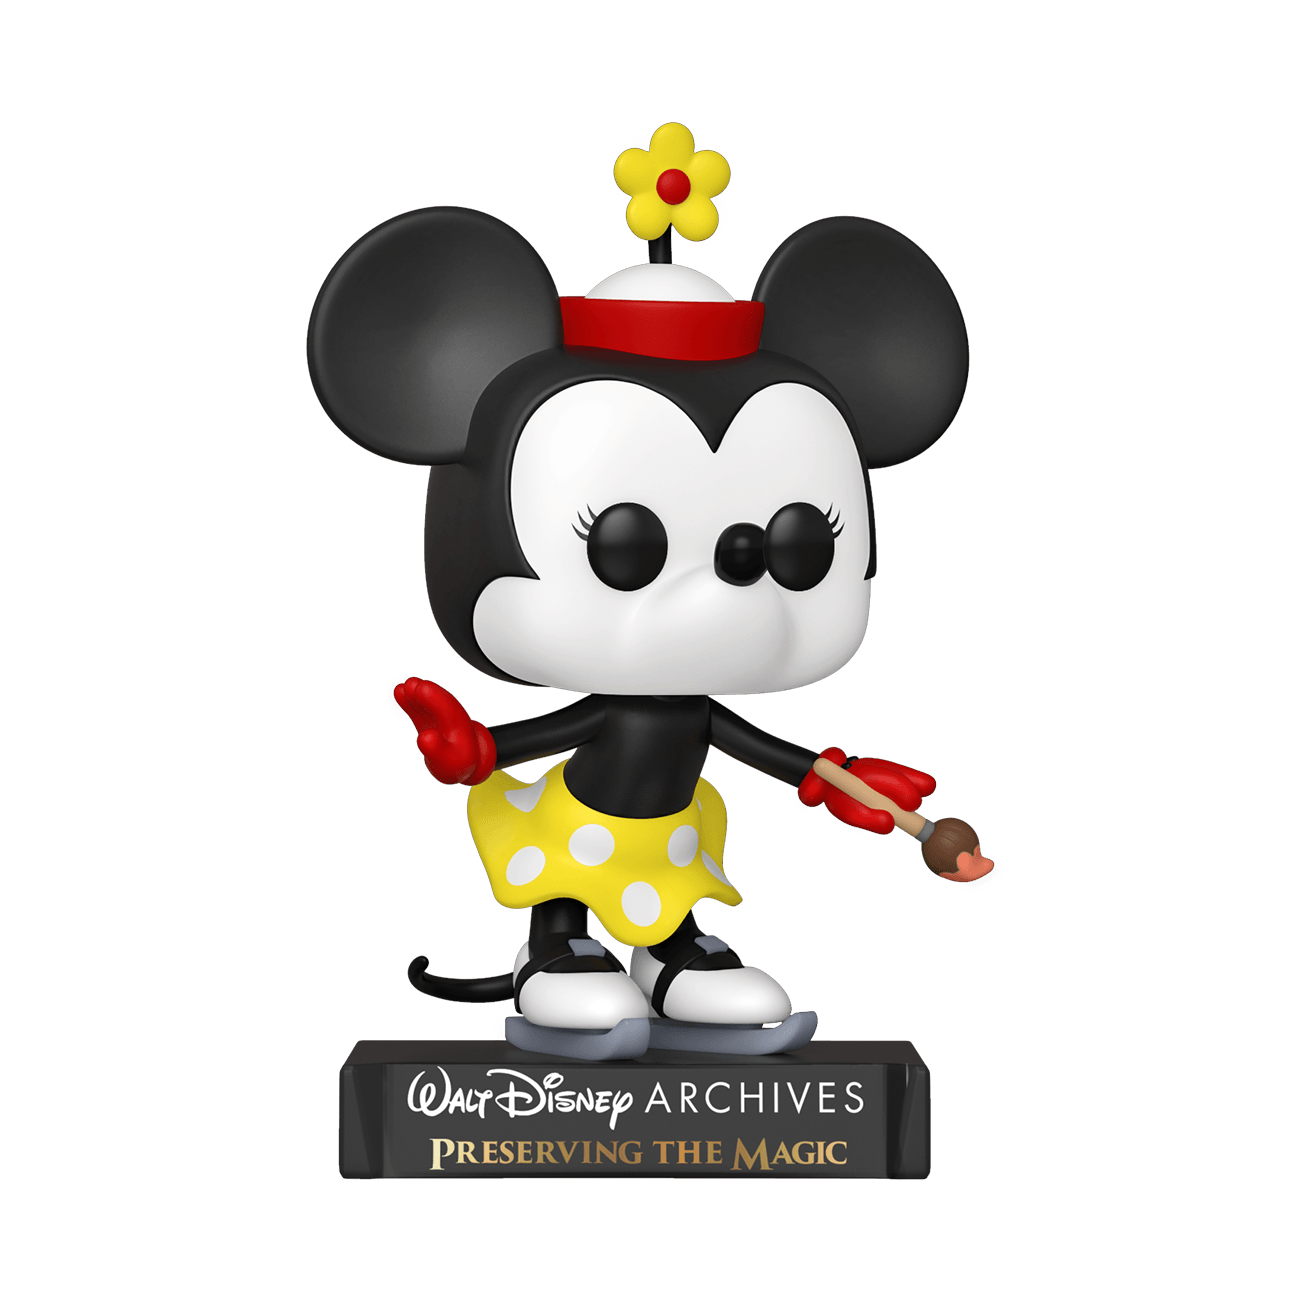 Funko Pop! Disney Archives - Minnie On Ice - BumbleToys - 18+, Action Figures, collectible, collectors, Funko, Girls